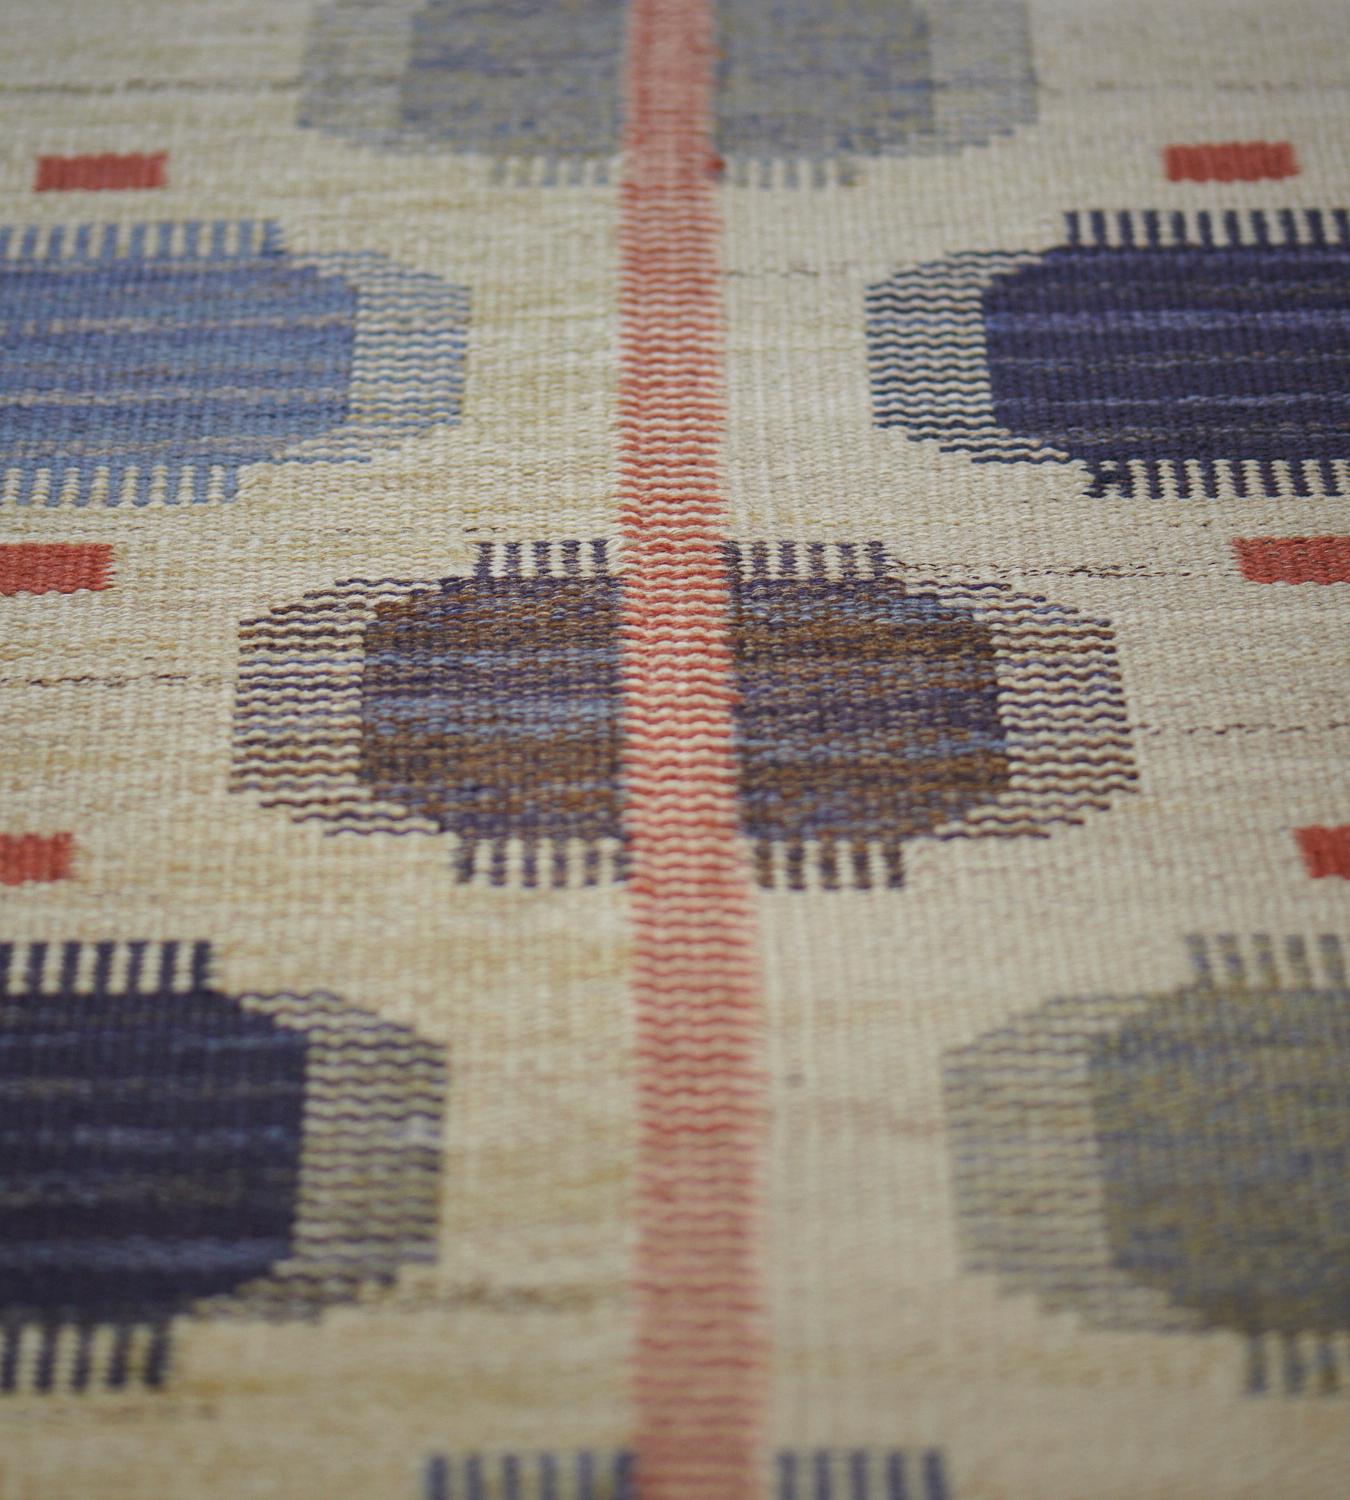 Hand-Woven Signed Mid-20th Century Marta Maas-fjetterström Wool Rug